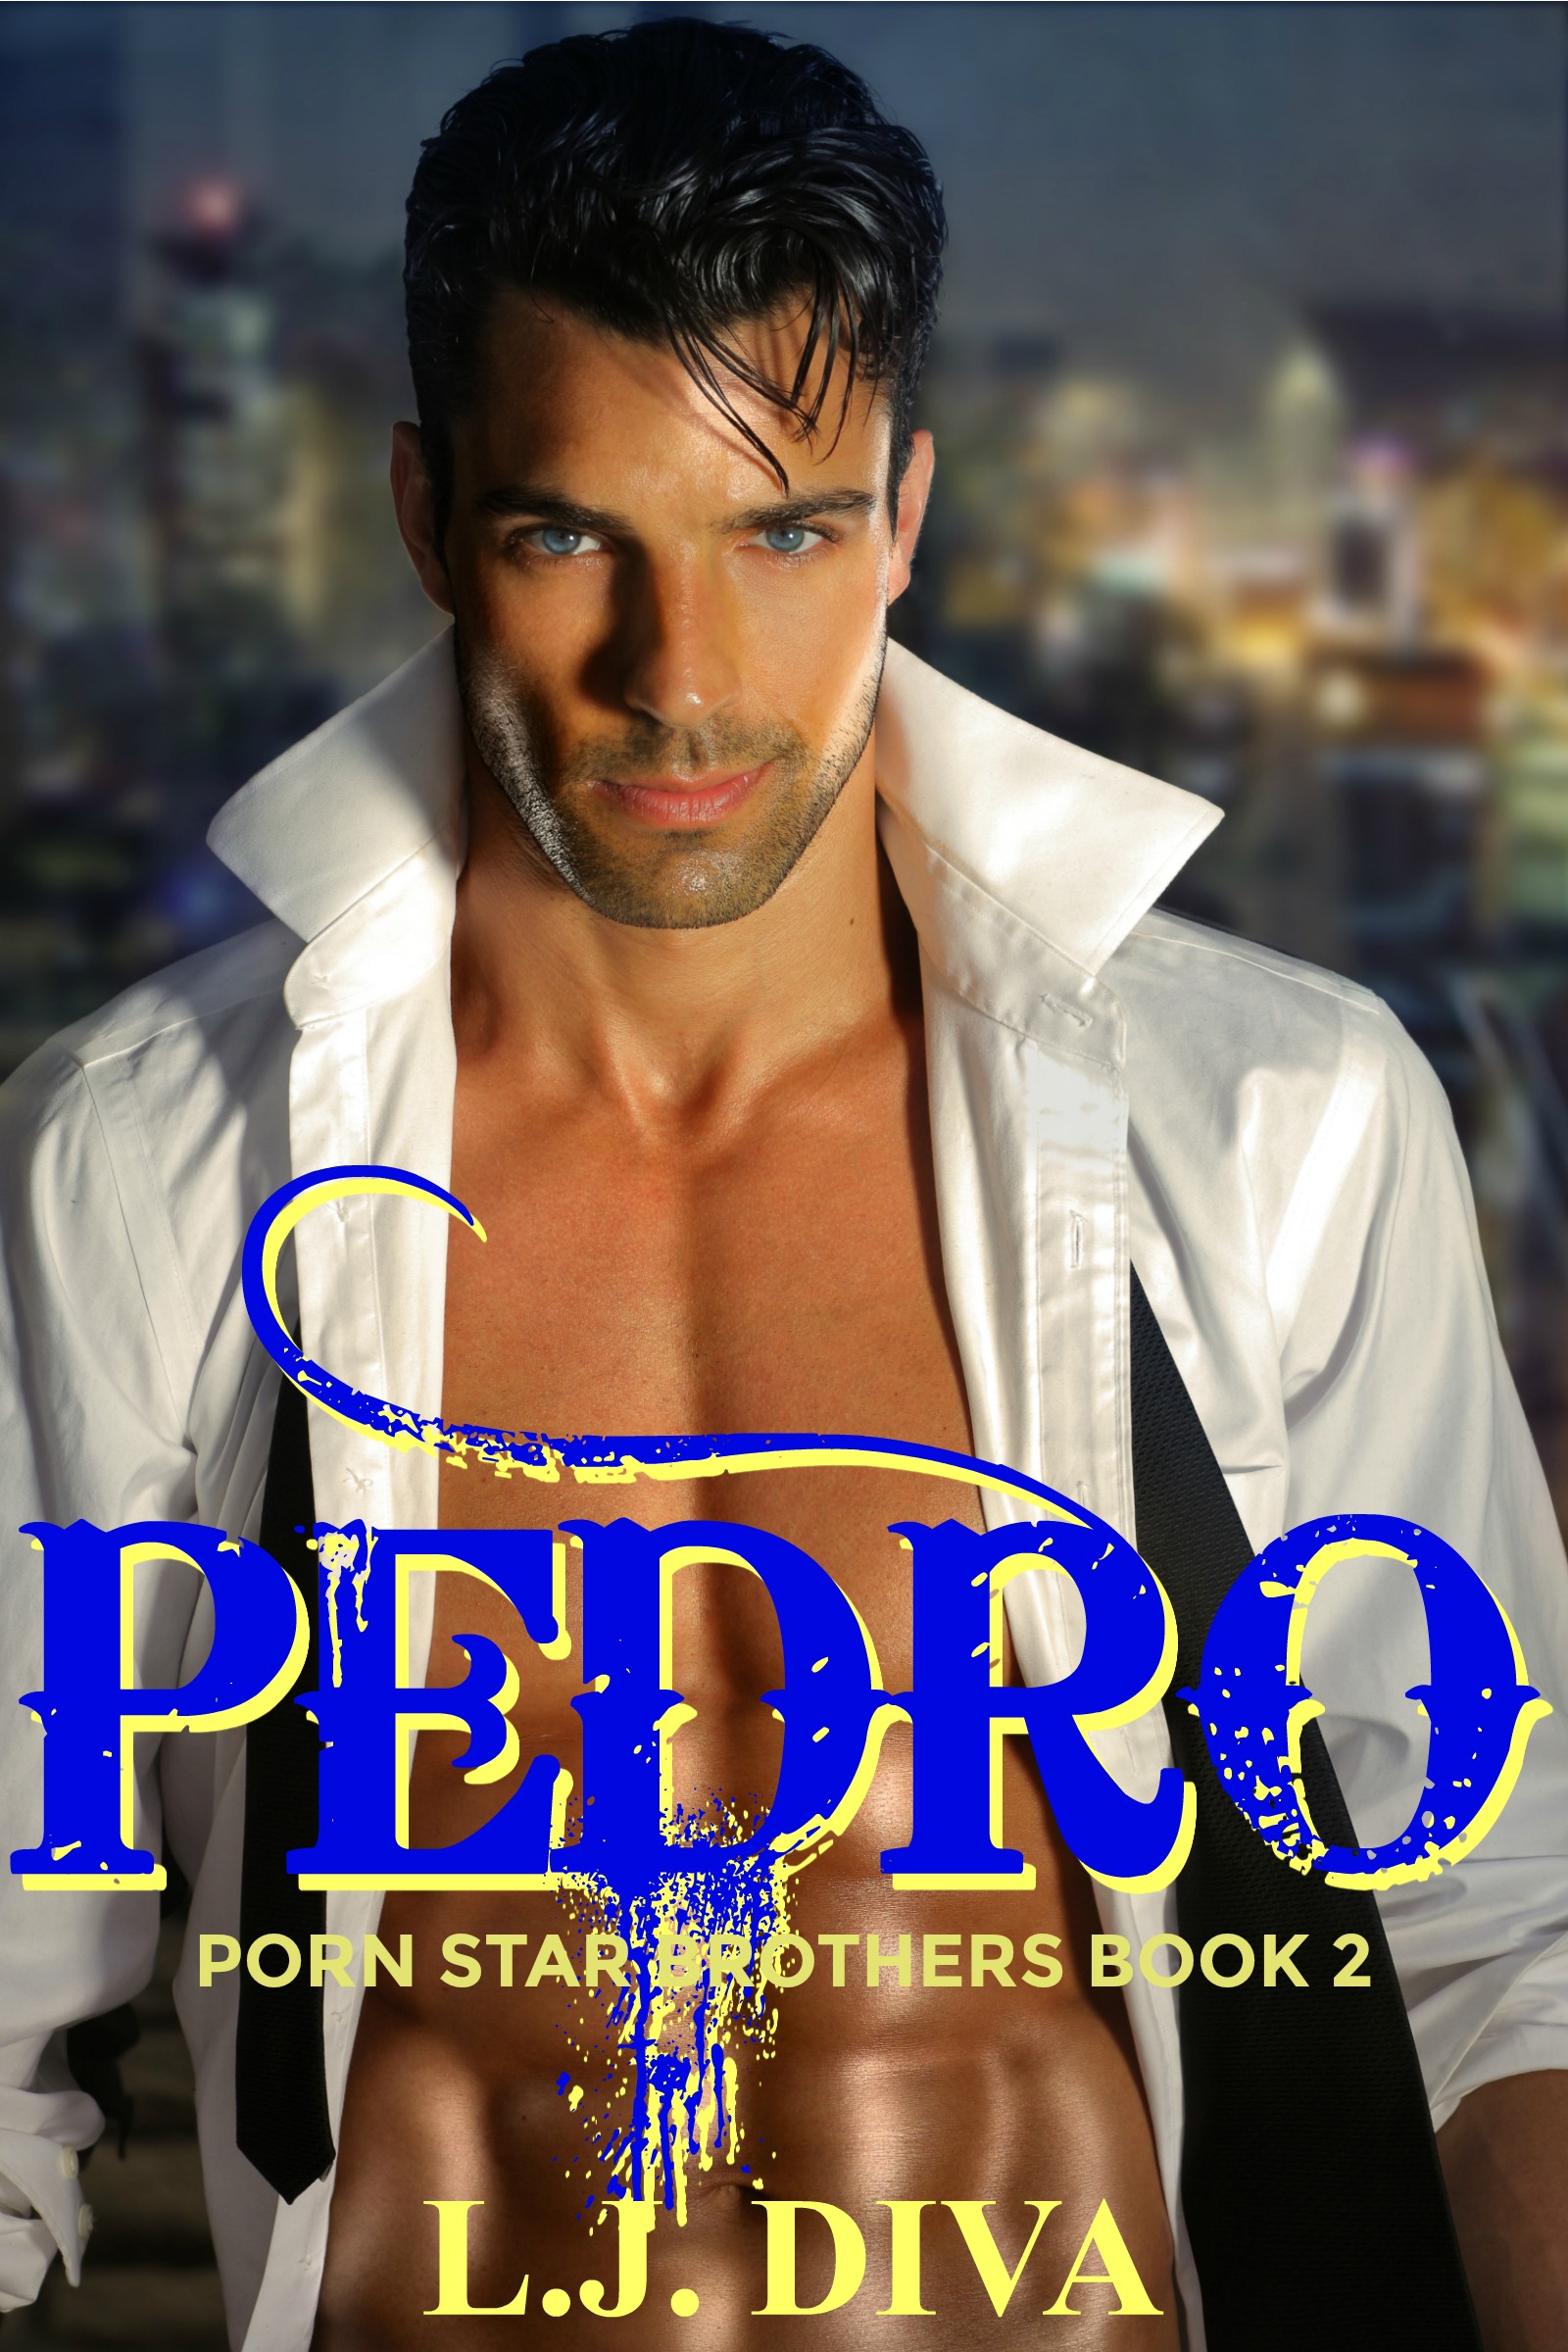 Youngest Lesbian Porn Stars - Pedro (Porn Star Brothers Book 2), an Ebook by L.J. Diva